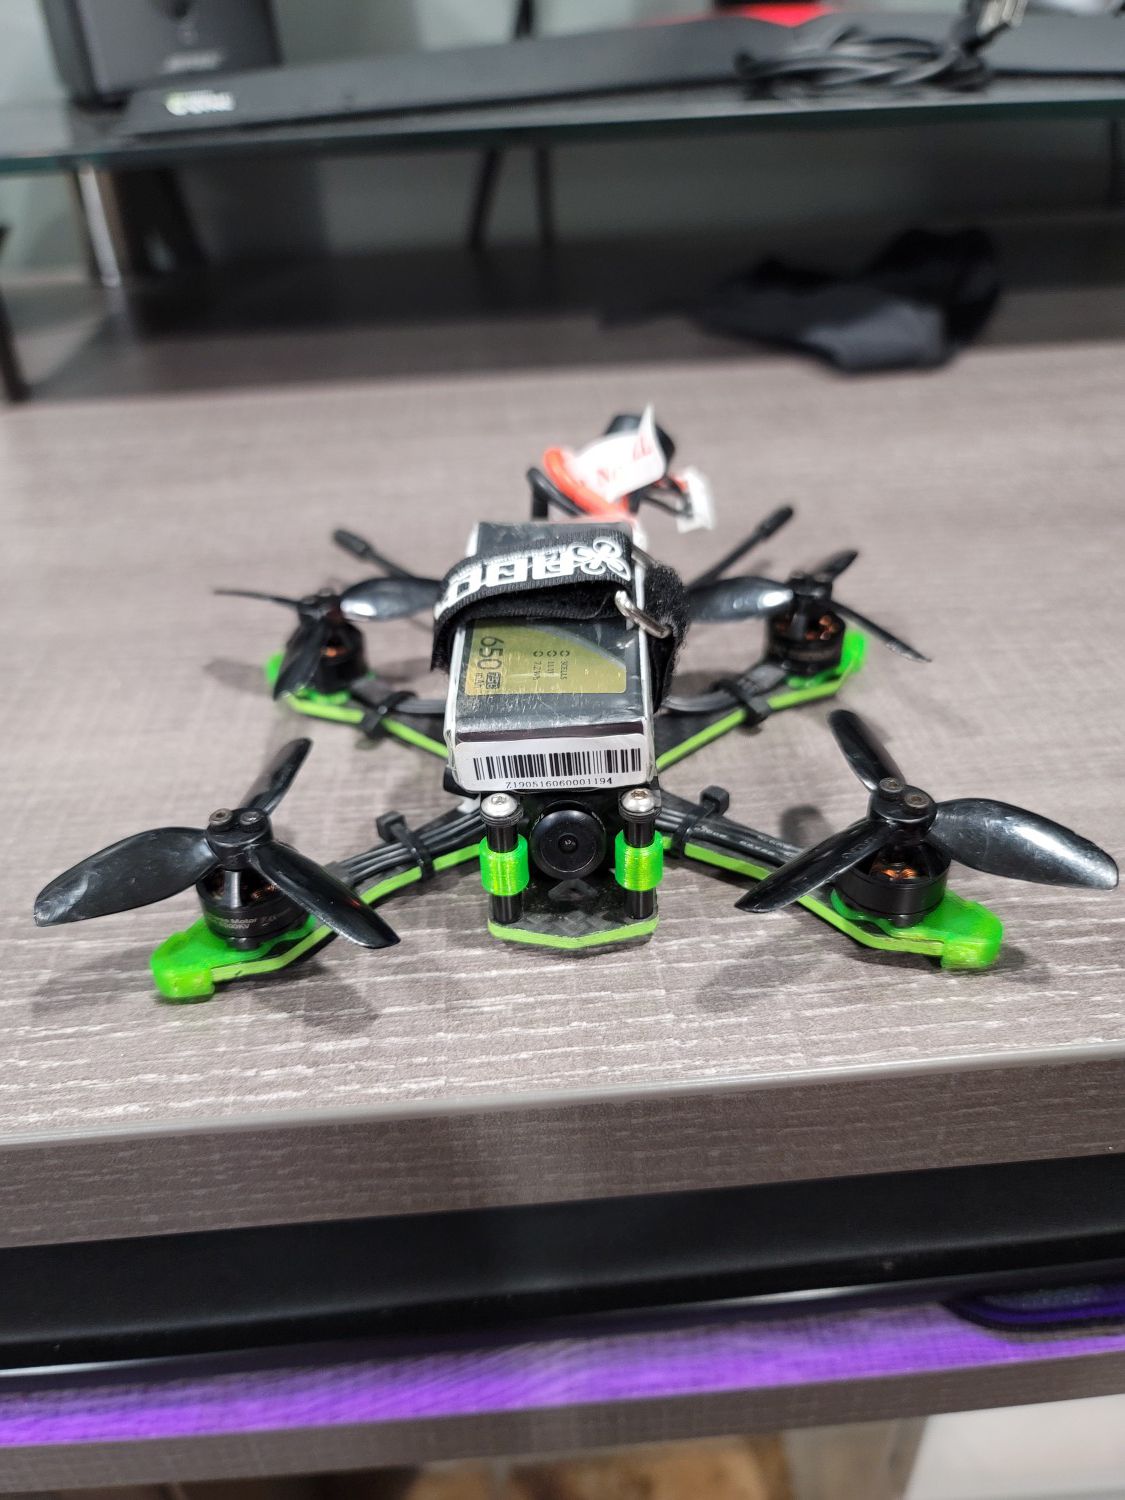 3 inch FPV DRONE . Frsky d16 or D8